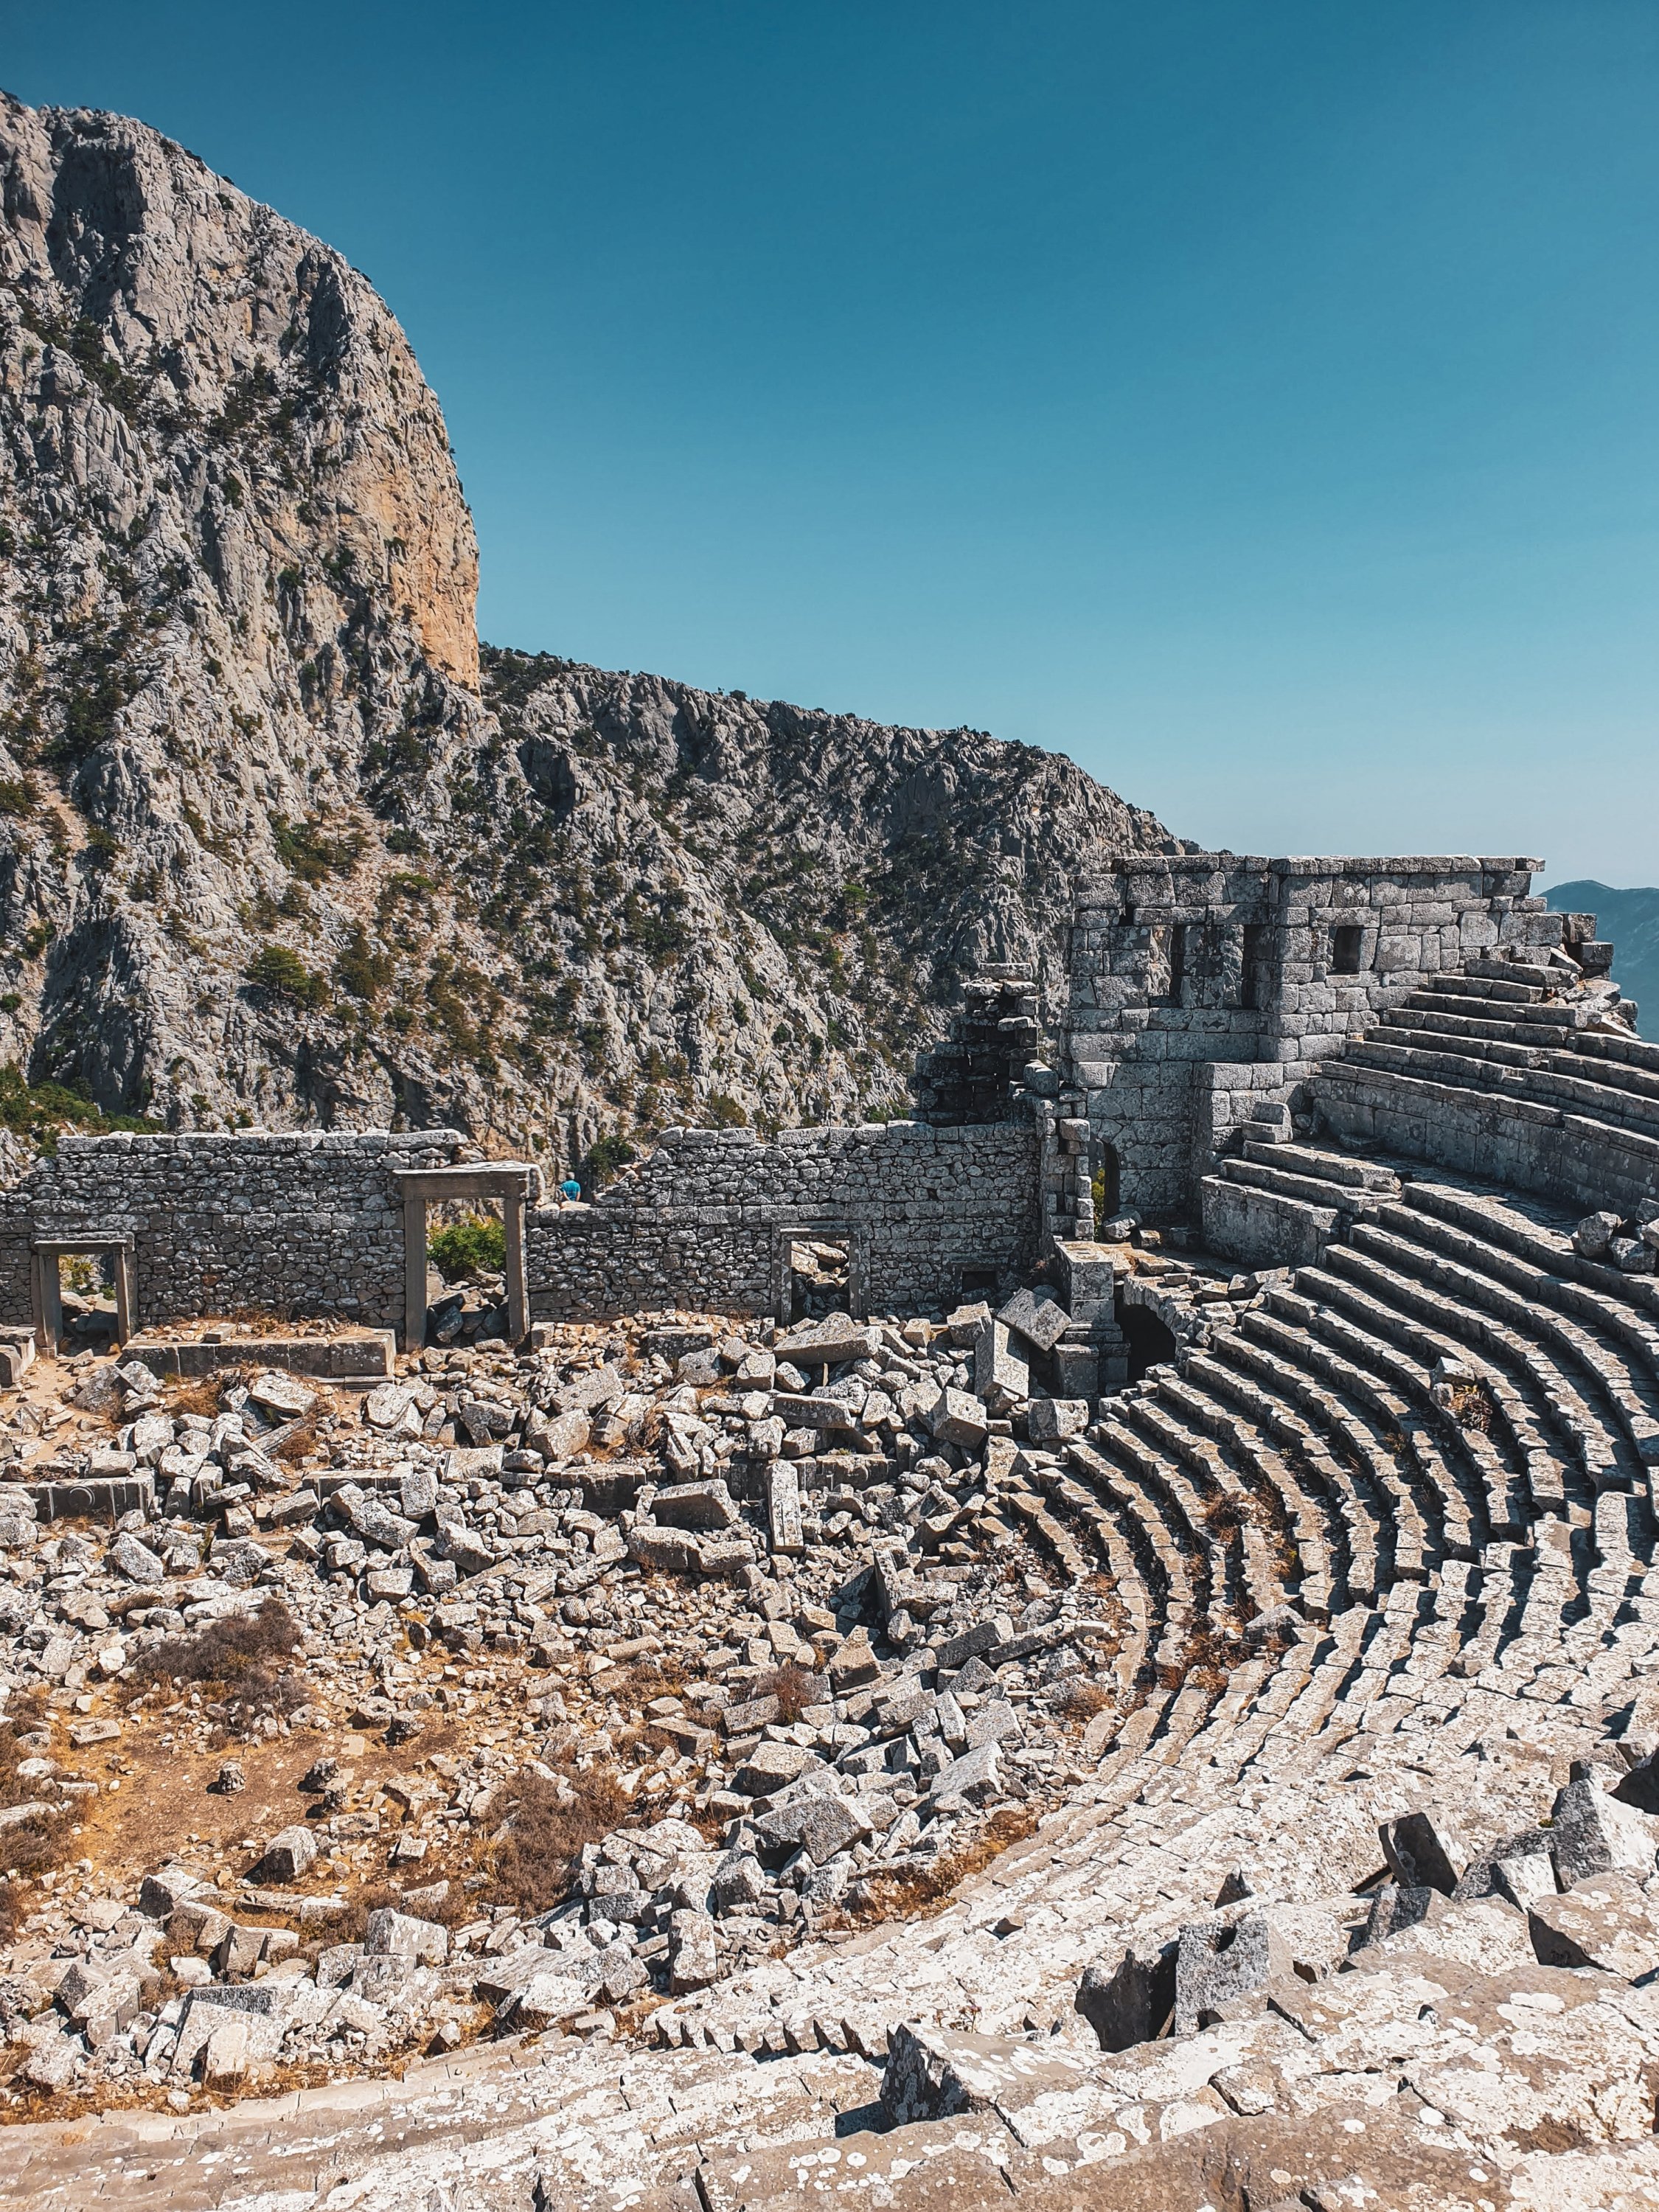 Seating up to 4,500 people, the ancient theater is the most notable attraction of Termessos. (Photo by Argun Konuk)